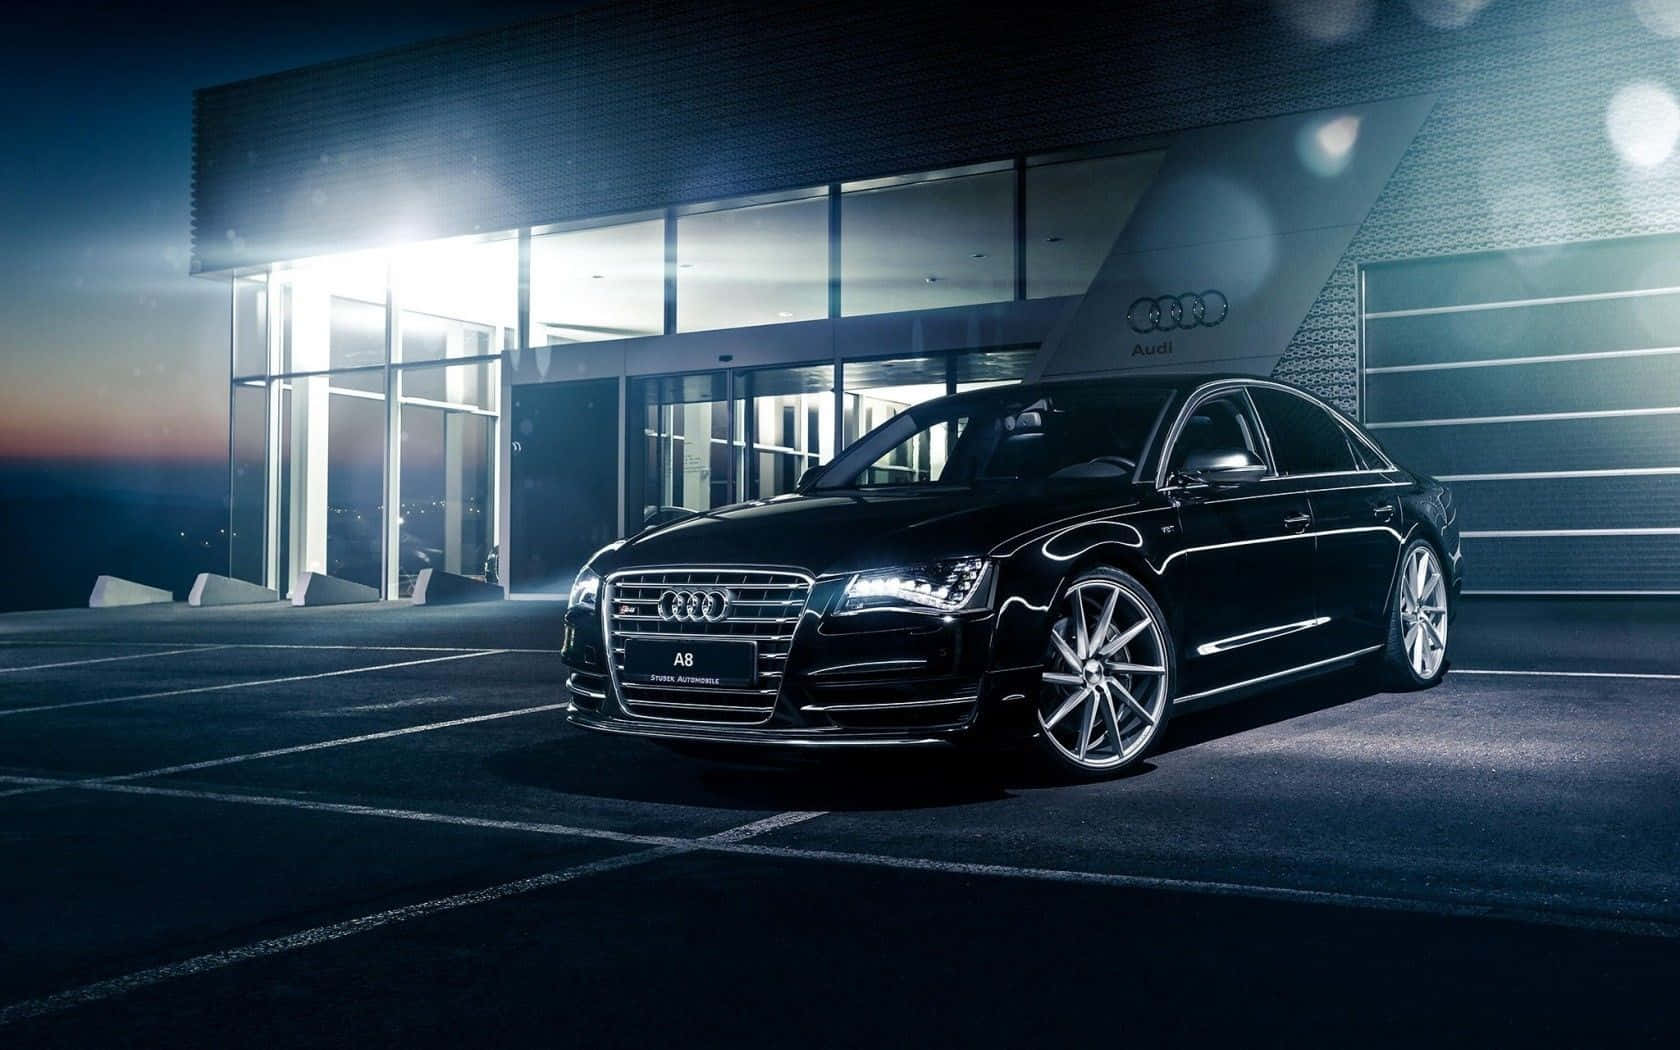 Sleek and Powerful Audi S8 in Motion Wallpaper